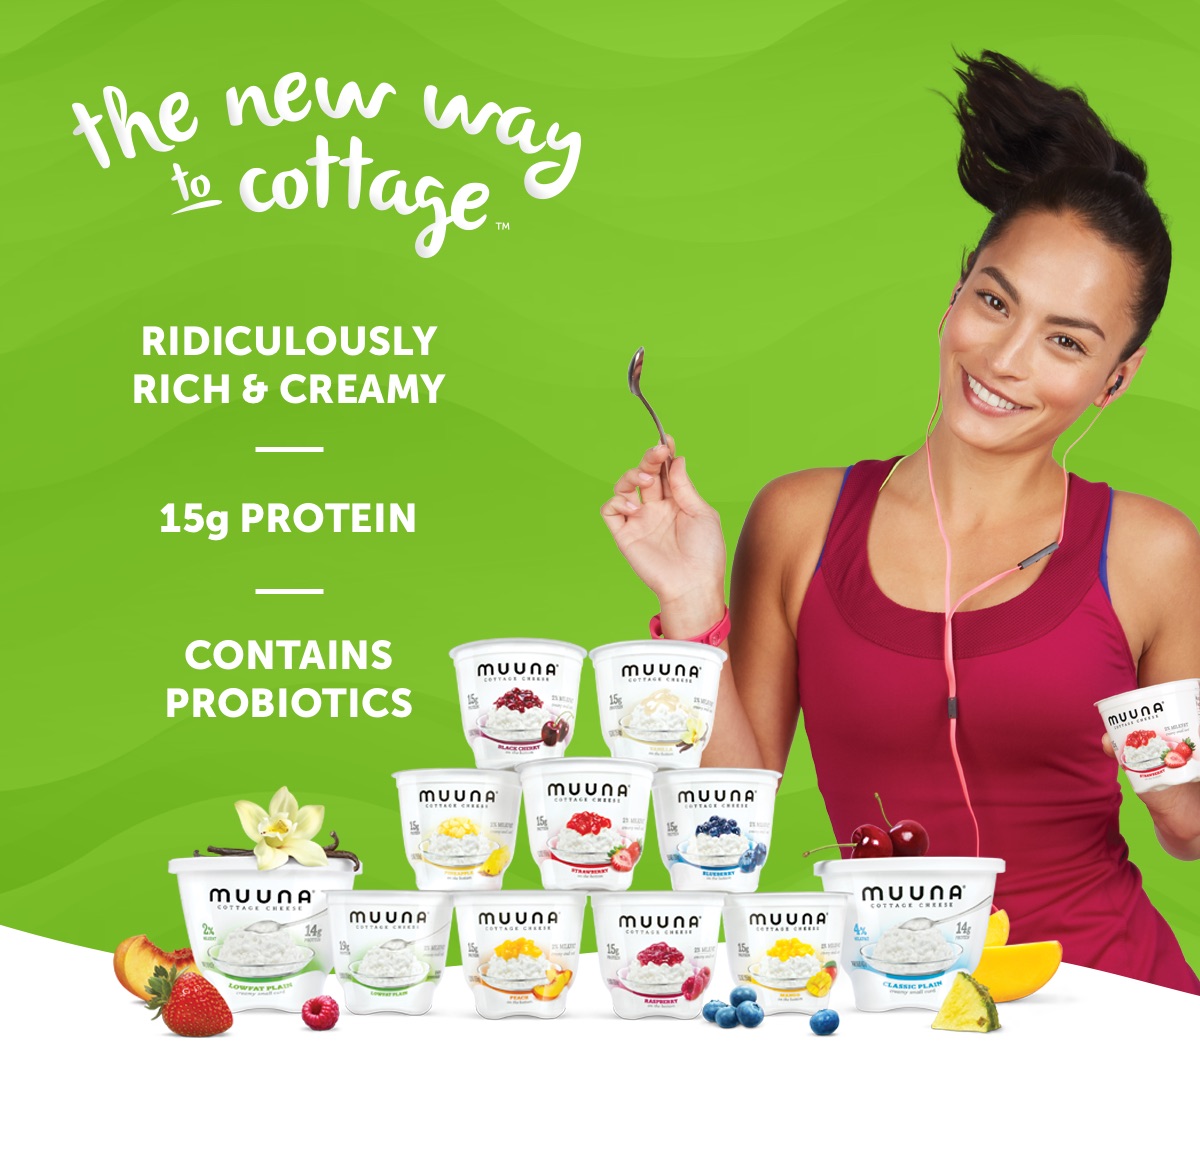 Muuna® Cottage Cheese | The New Way to Cottage - Ridiculously Rich & Creamy - 15g of Protein - Contains Probiotics